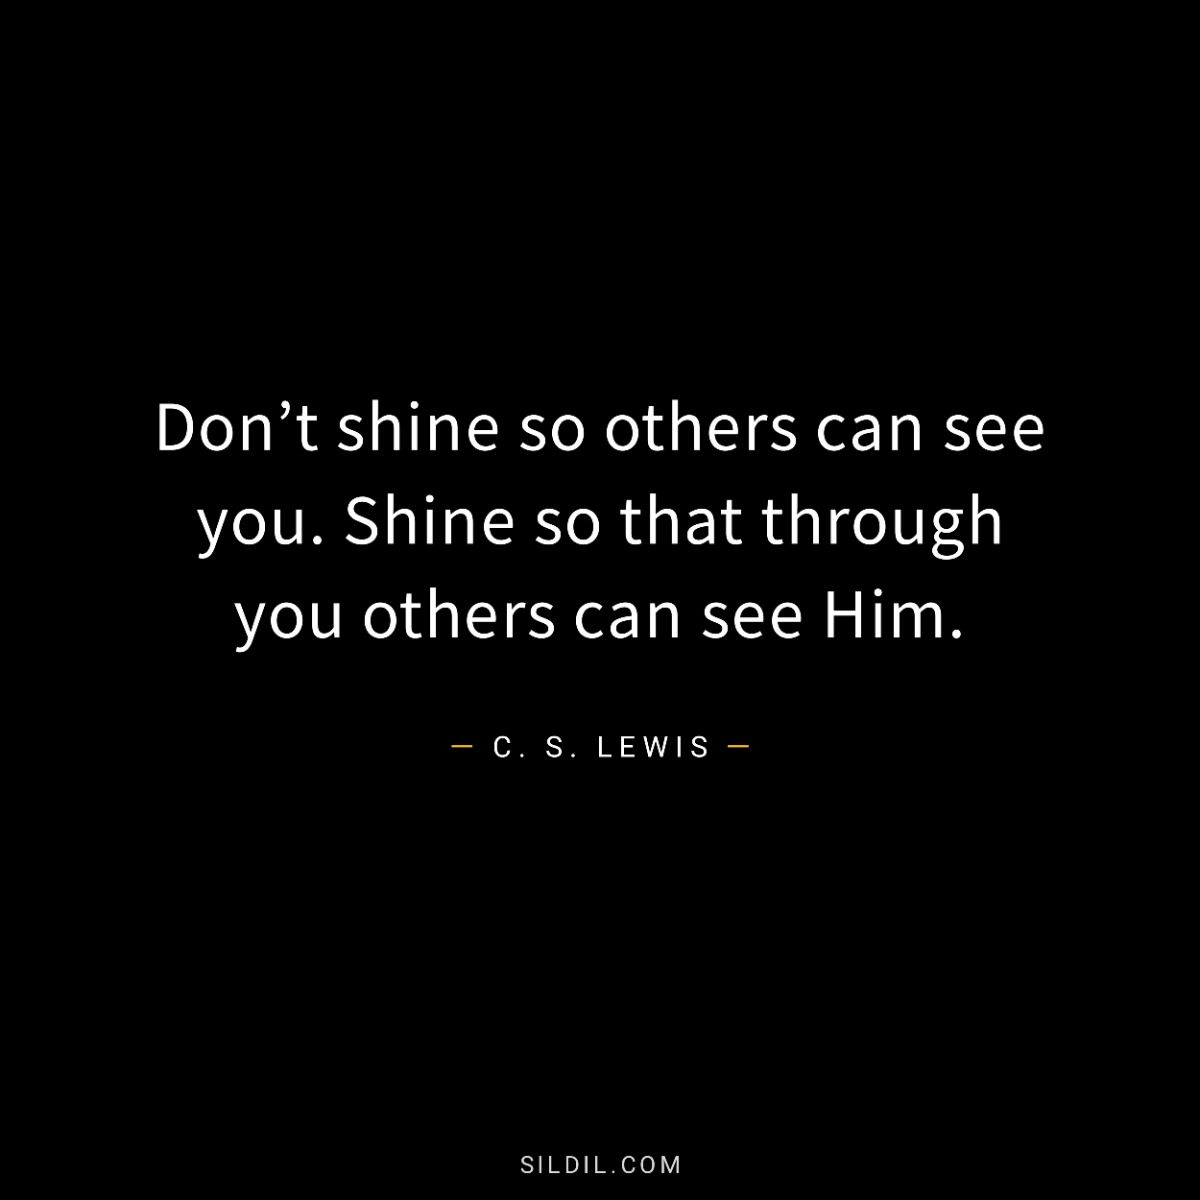 Don’t shine so others can see you. Shine so that through you others can see Him.